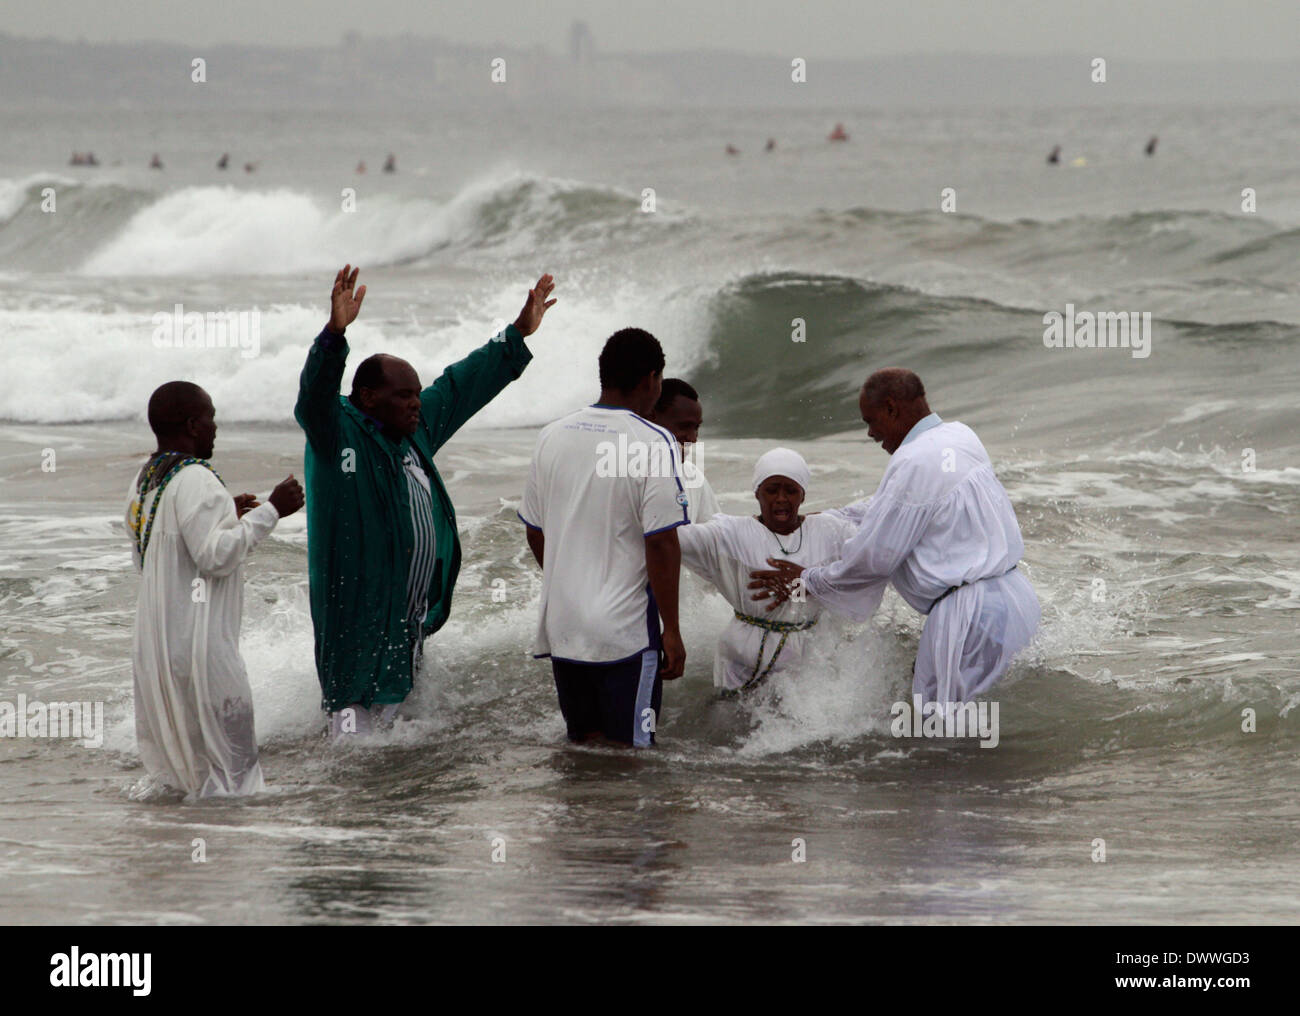 A woman is baptised in the Indian Ocean on the Durban beach front, March 28, 2010. © Rogan Ward 2010 Stock Photo